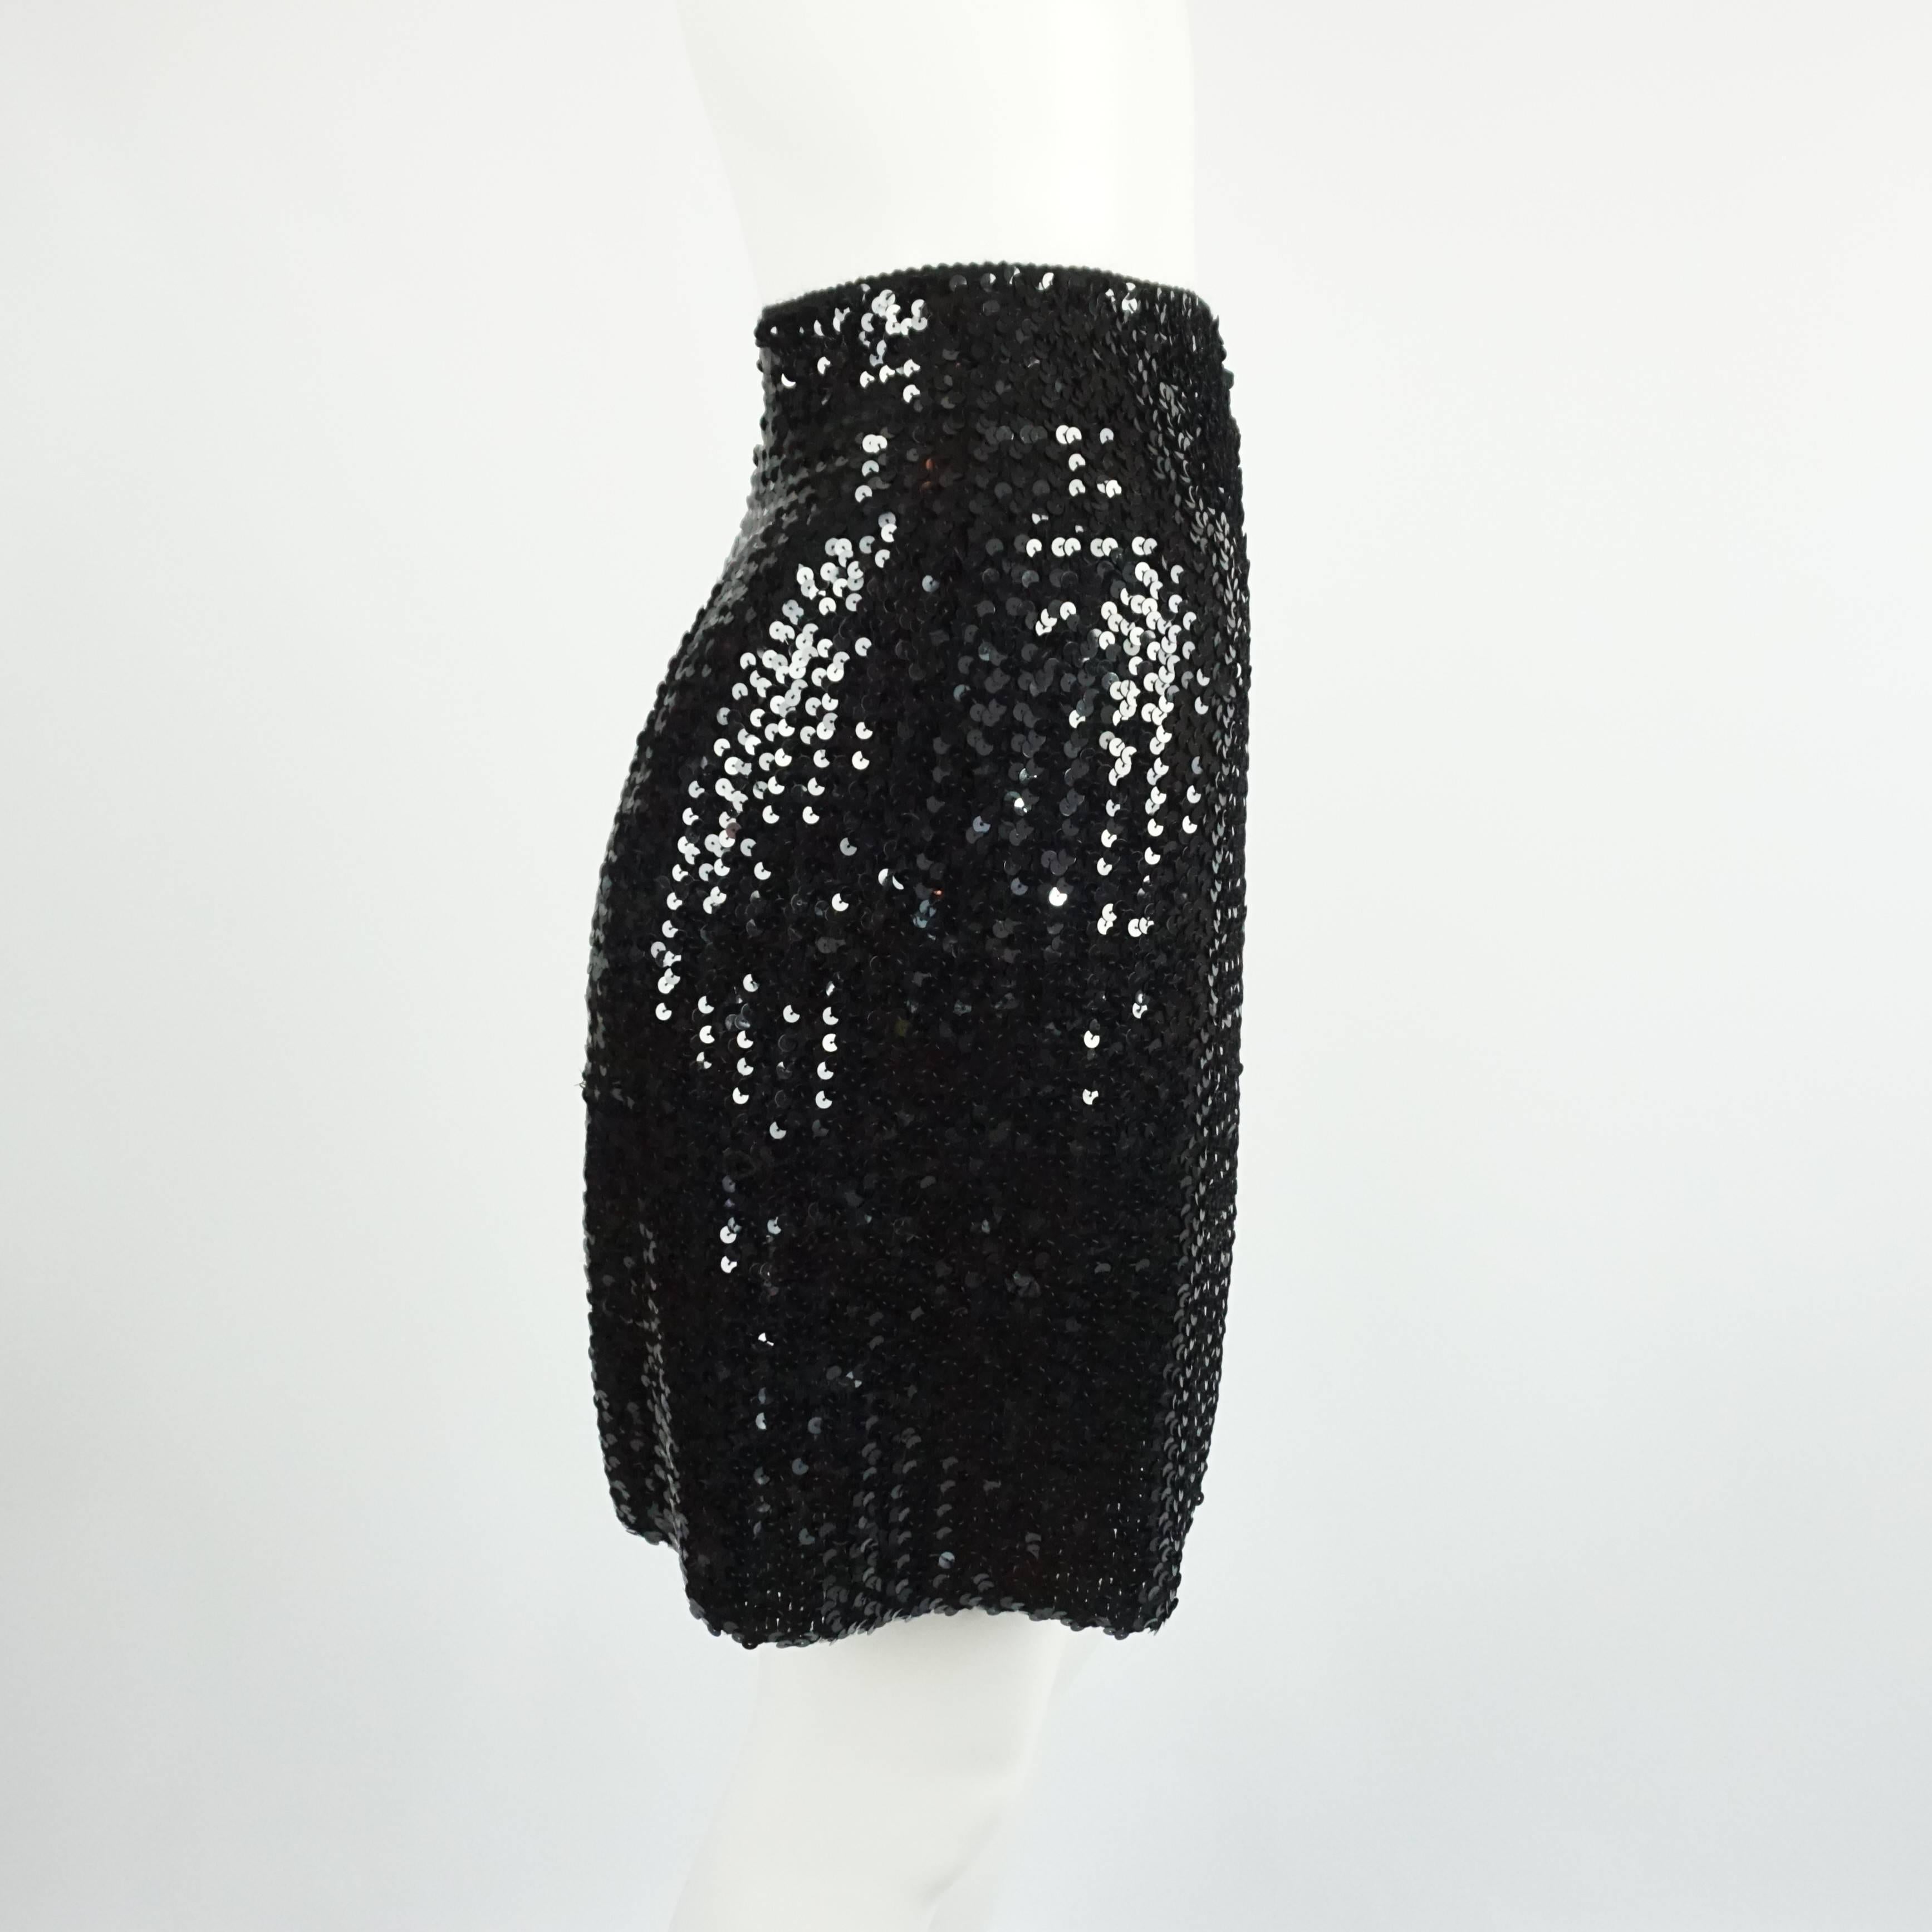 This 1990's Vintage Todd Oldham skirt is made of a knitted material with sequins all over. The fabric stretches allowing it to fit several sizes. The piece is in very good vintage condition. Size S, circa 1990's. 

Measurements
Waist: 28-30